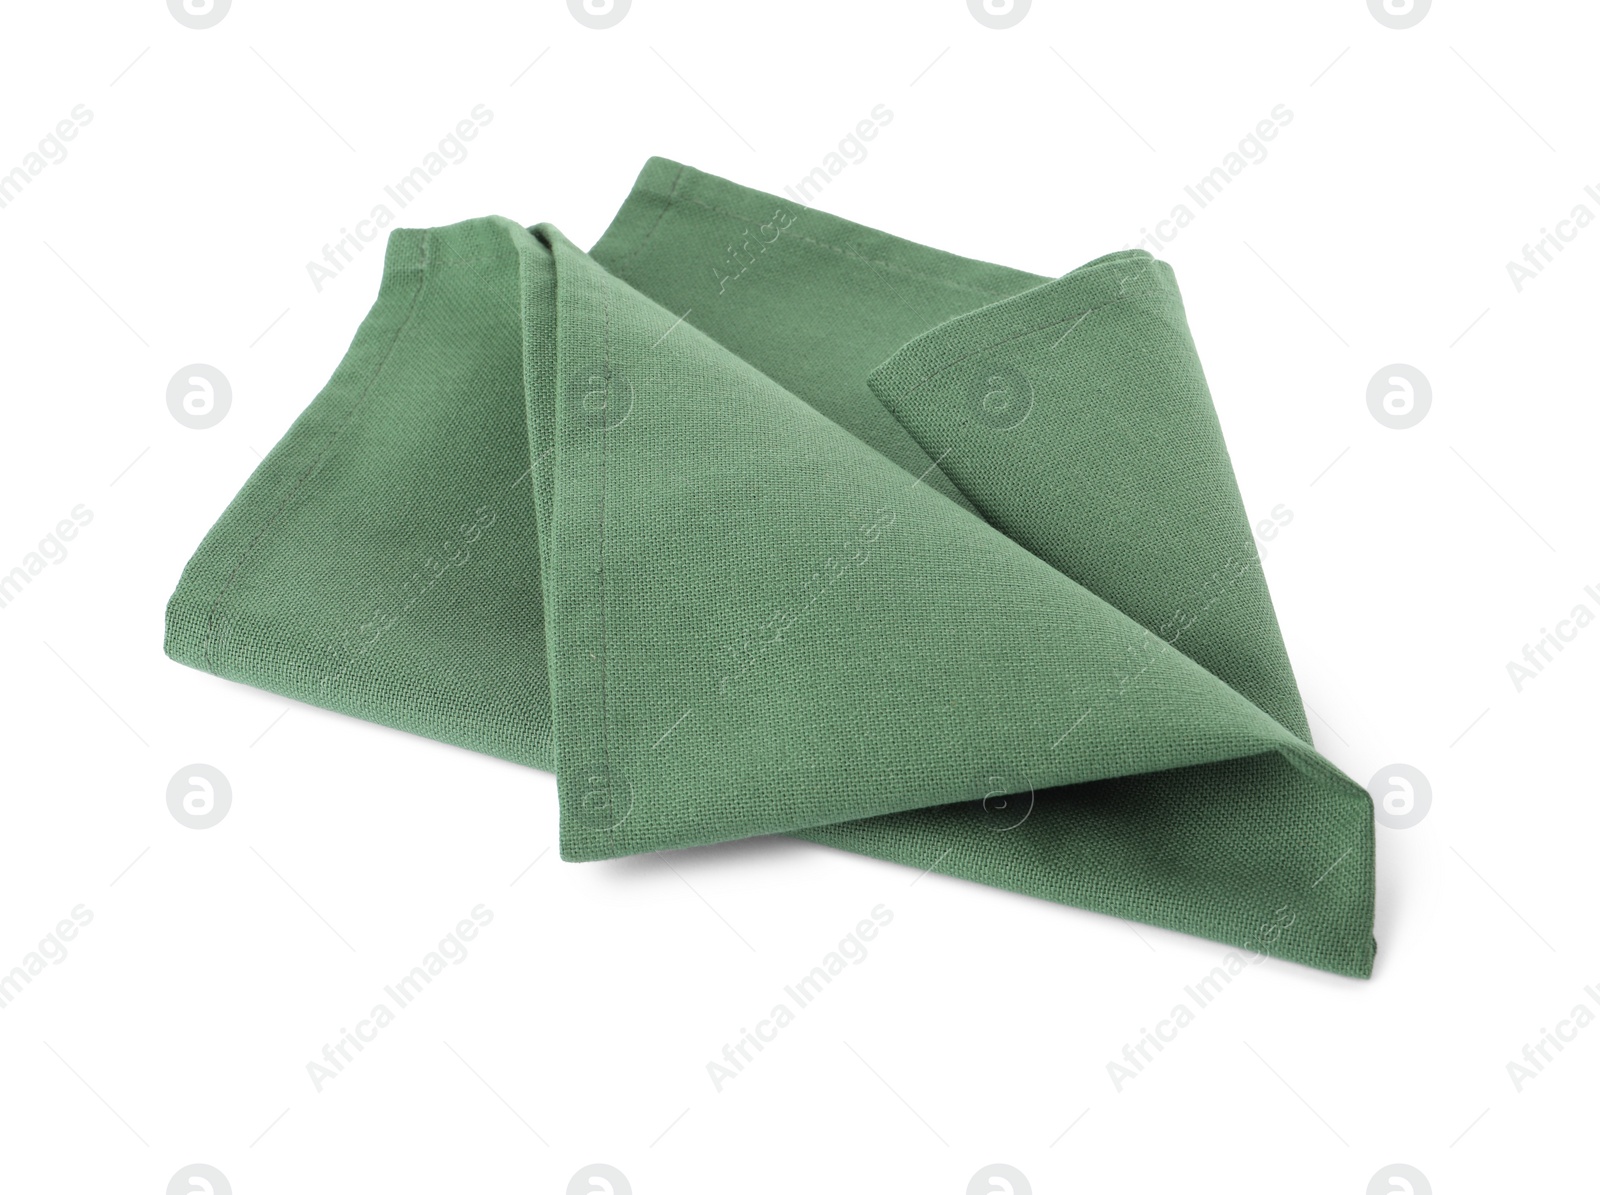 Photo of New clean green cloth napkin isolated on white